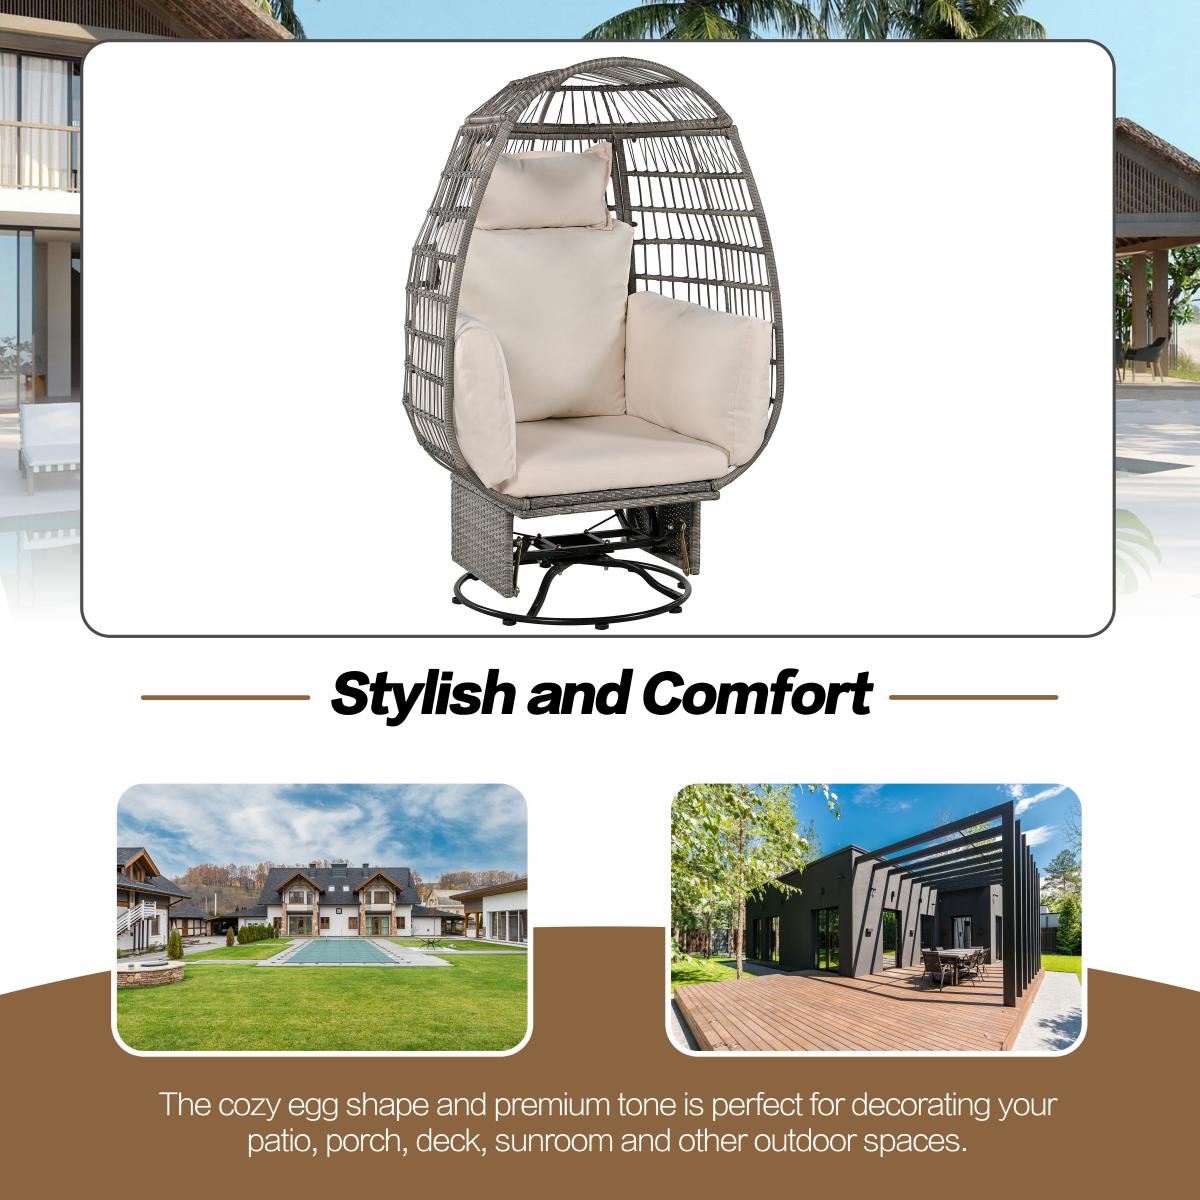 TREXM Outdoor Swivel Chair with Cushions, Rattan Egg Patio Chair with Rocking Function for Balcony, Poolside and Garden (Grey Wicker + Beige Cushion)